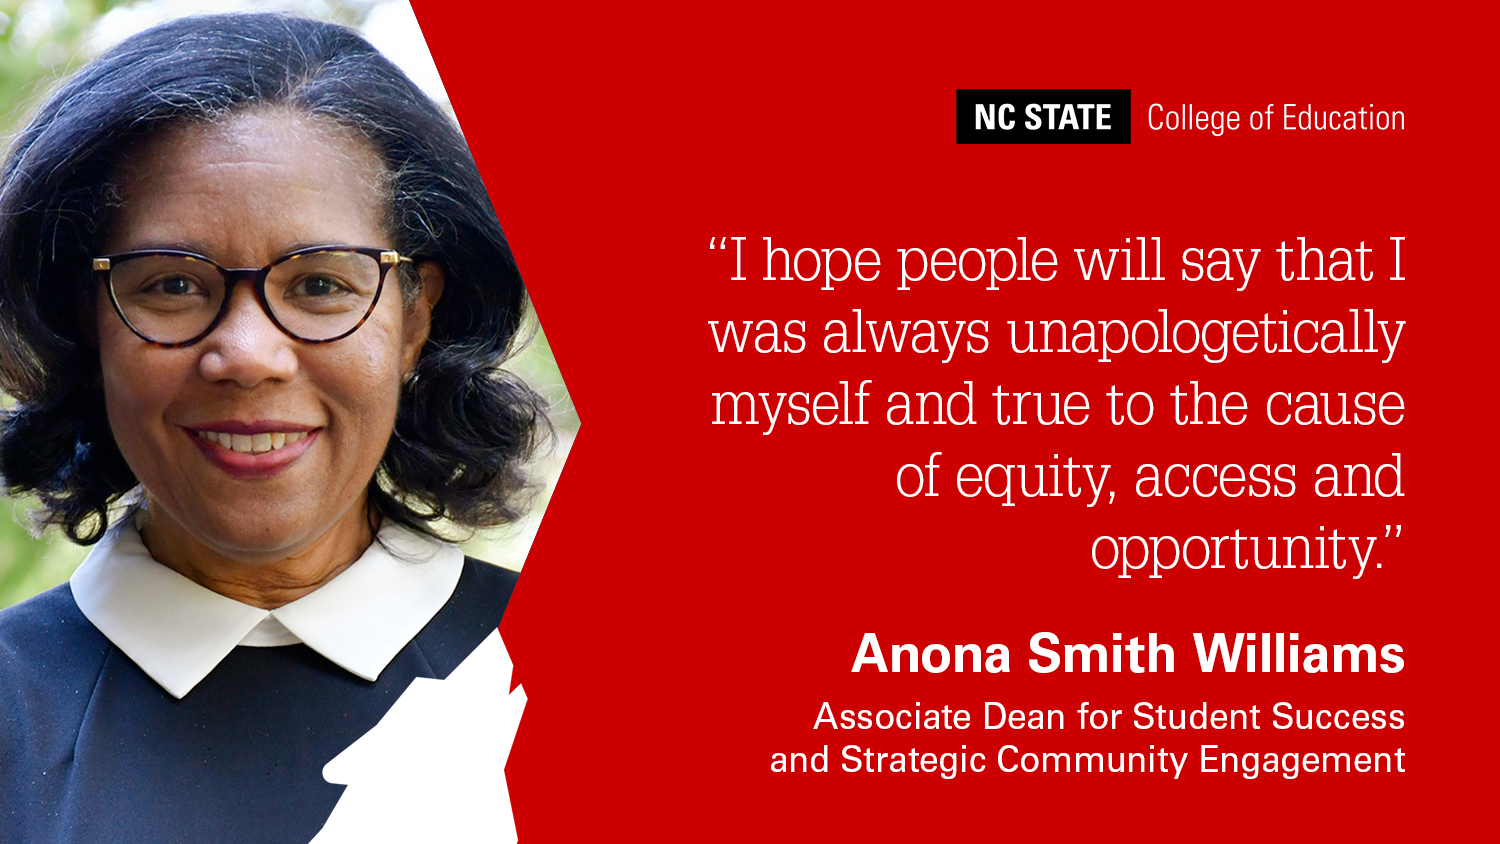 Photo of Anona Smith Williams on a red background with text reading: I hope people will say that I was always unapologetically myself and true to the cause of equity, access and opportunity.